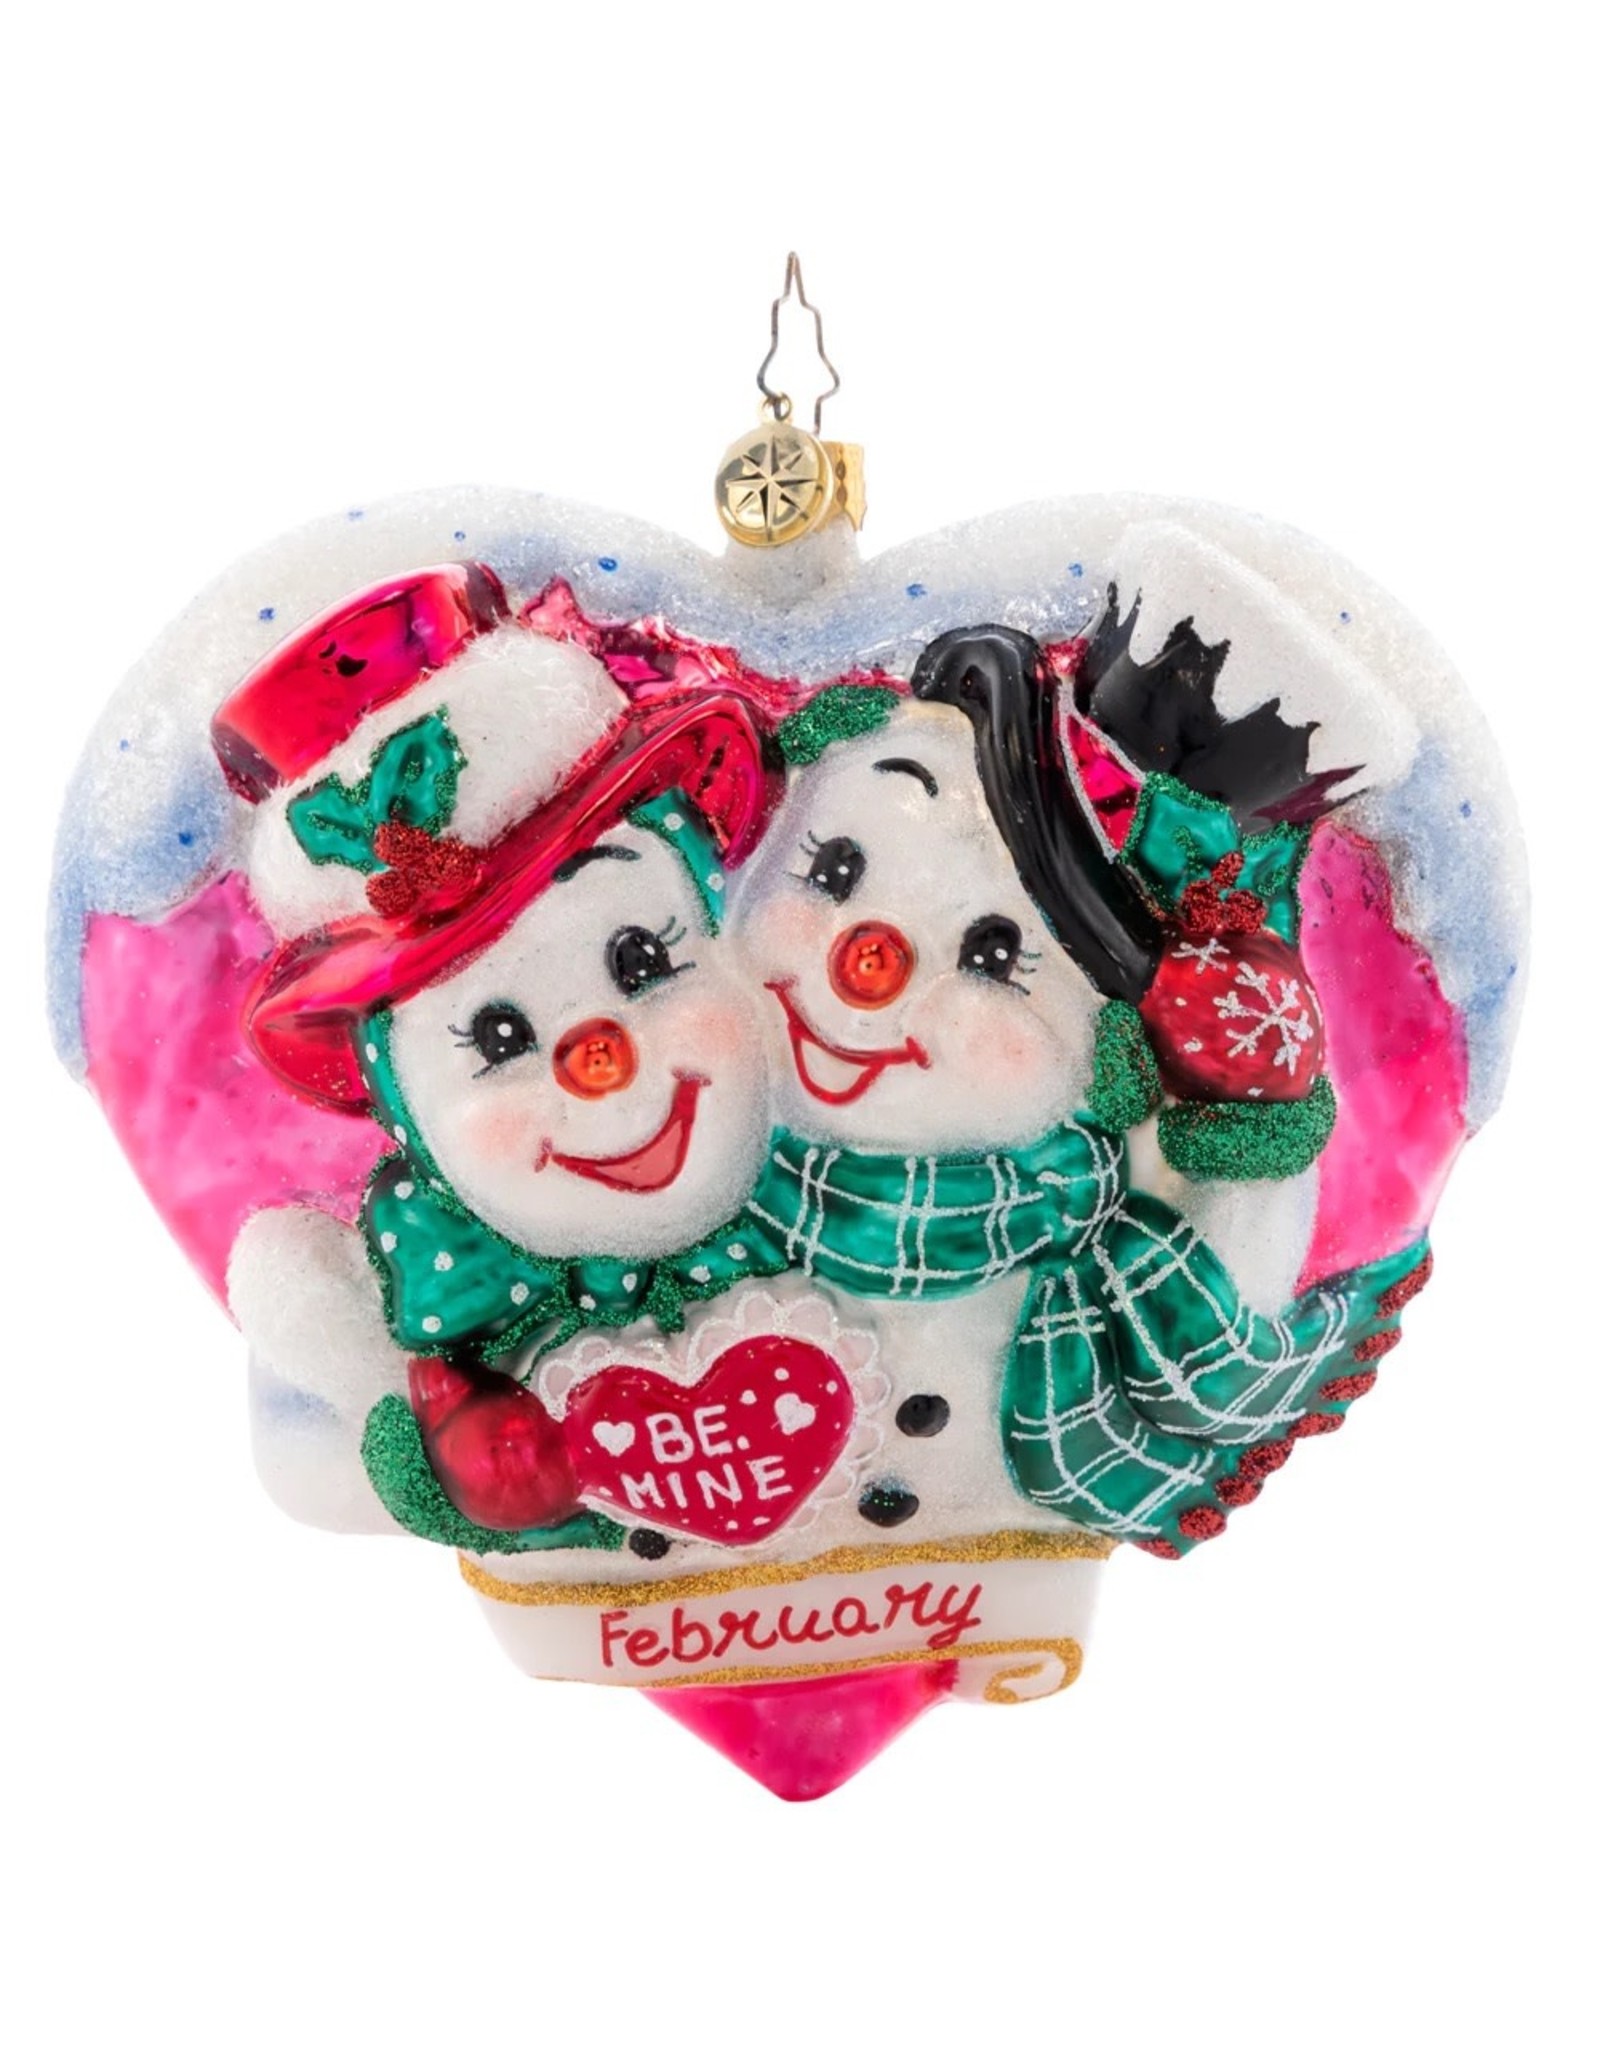 Christopher Radko Forever And Always | February Ornament of the Month